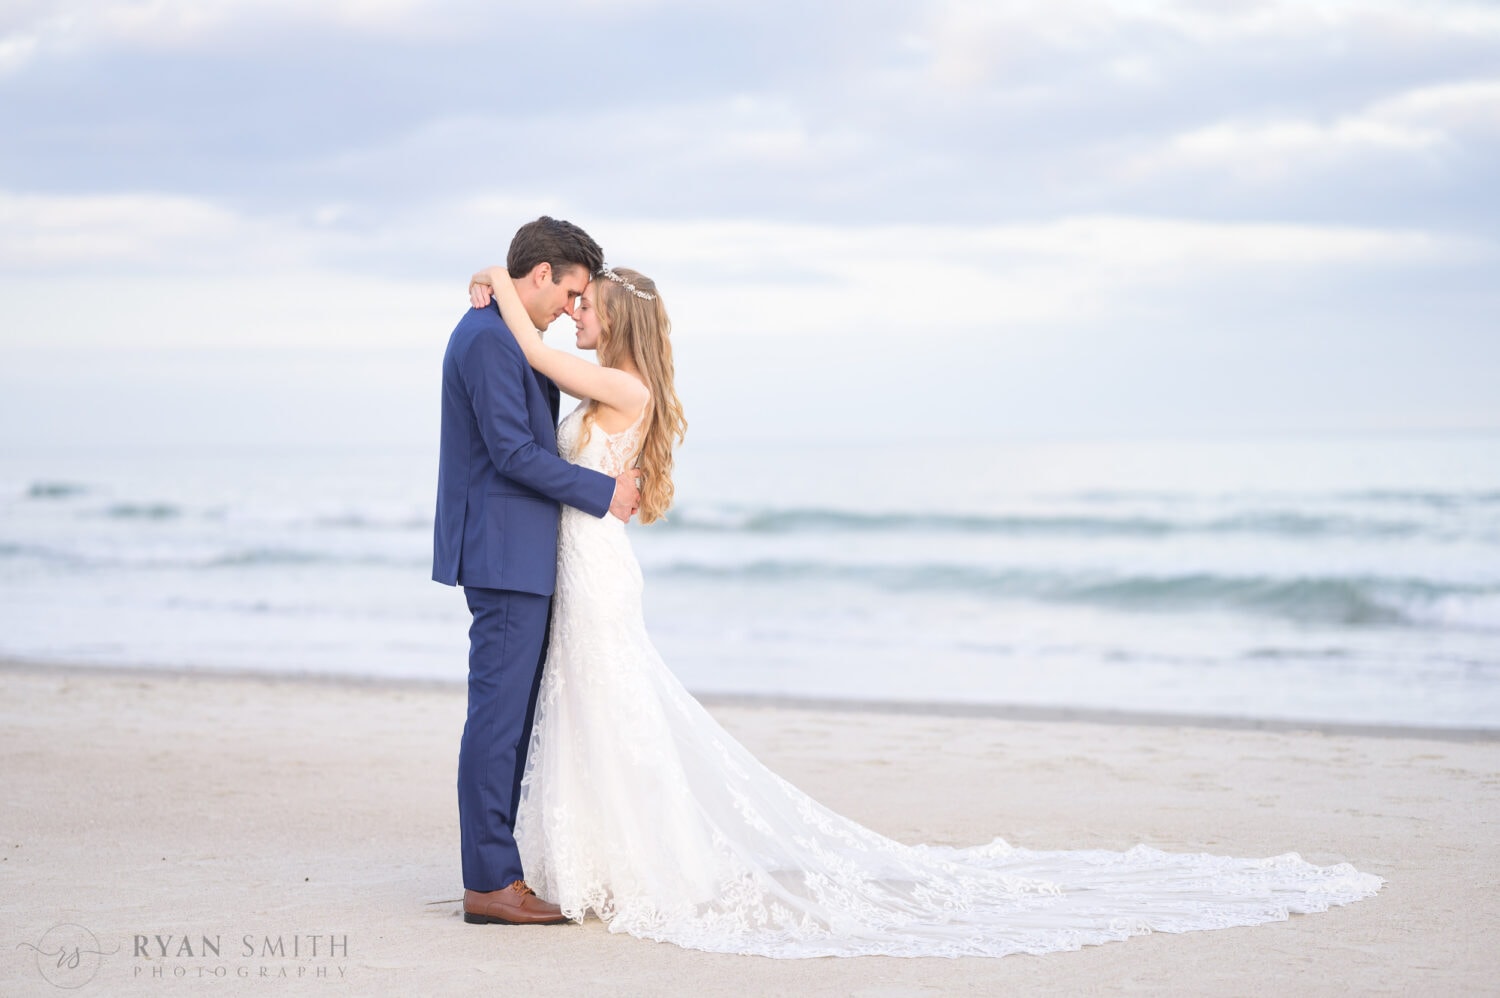 Touching foreheads in front of the ocean - Pawleys Island